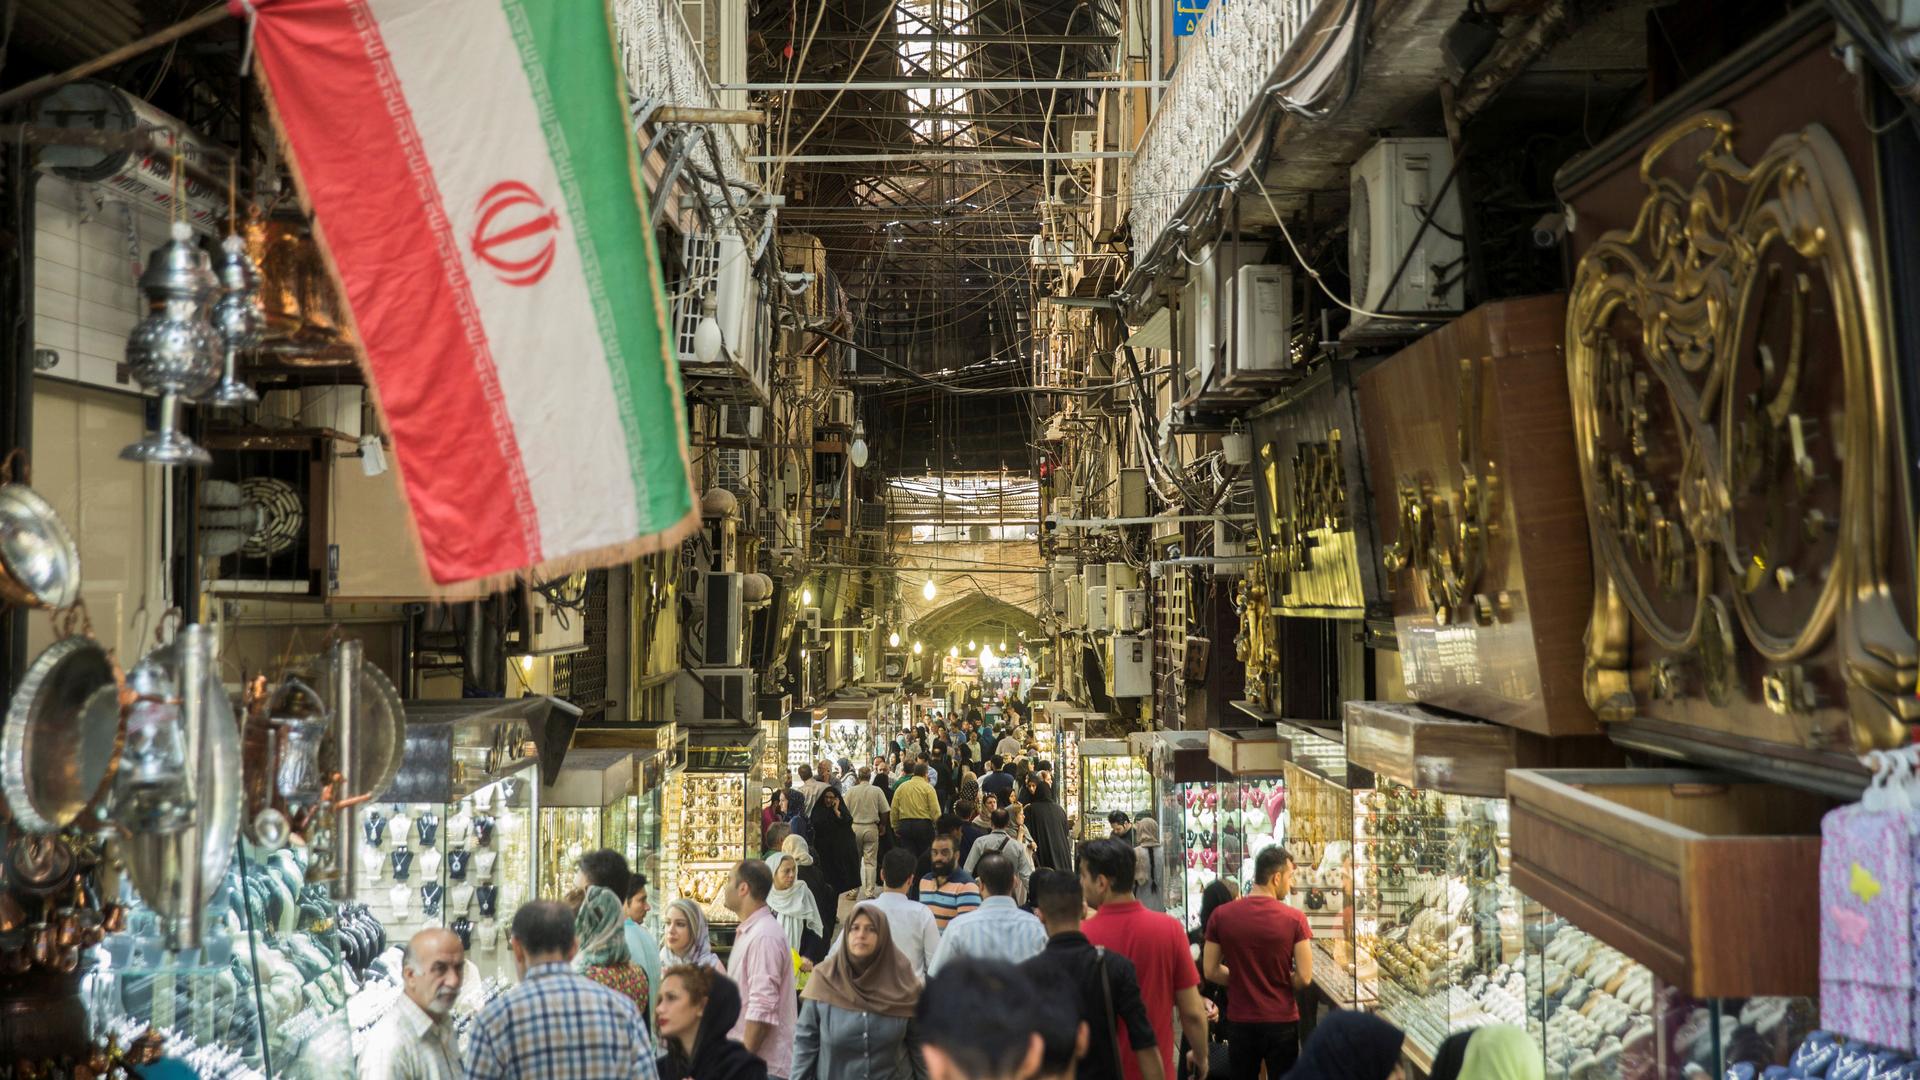 Crowds fill the bottom of the frame. On both sides are shops and the on the right side of the image is an Iranian flag